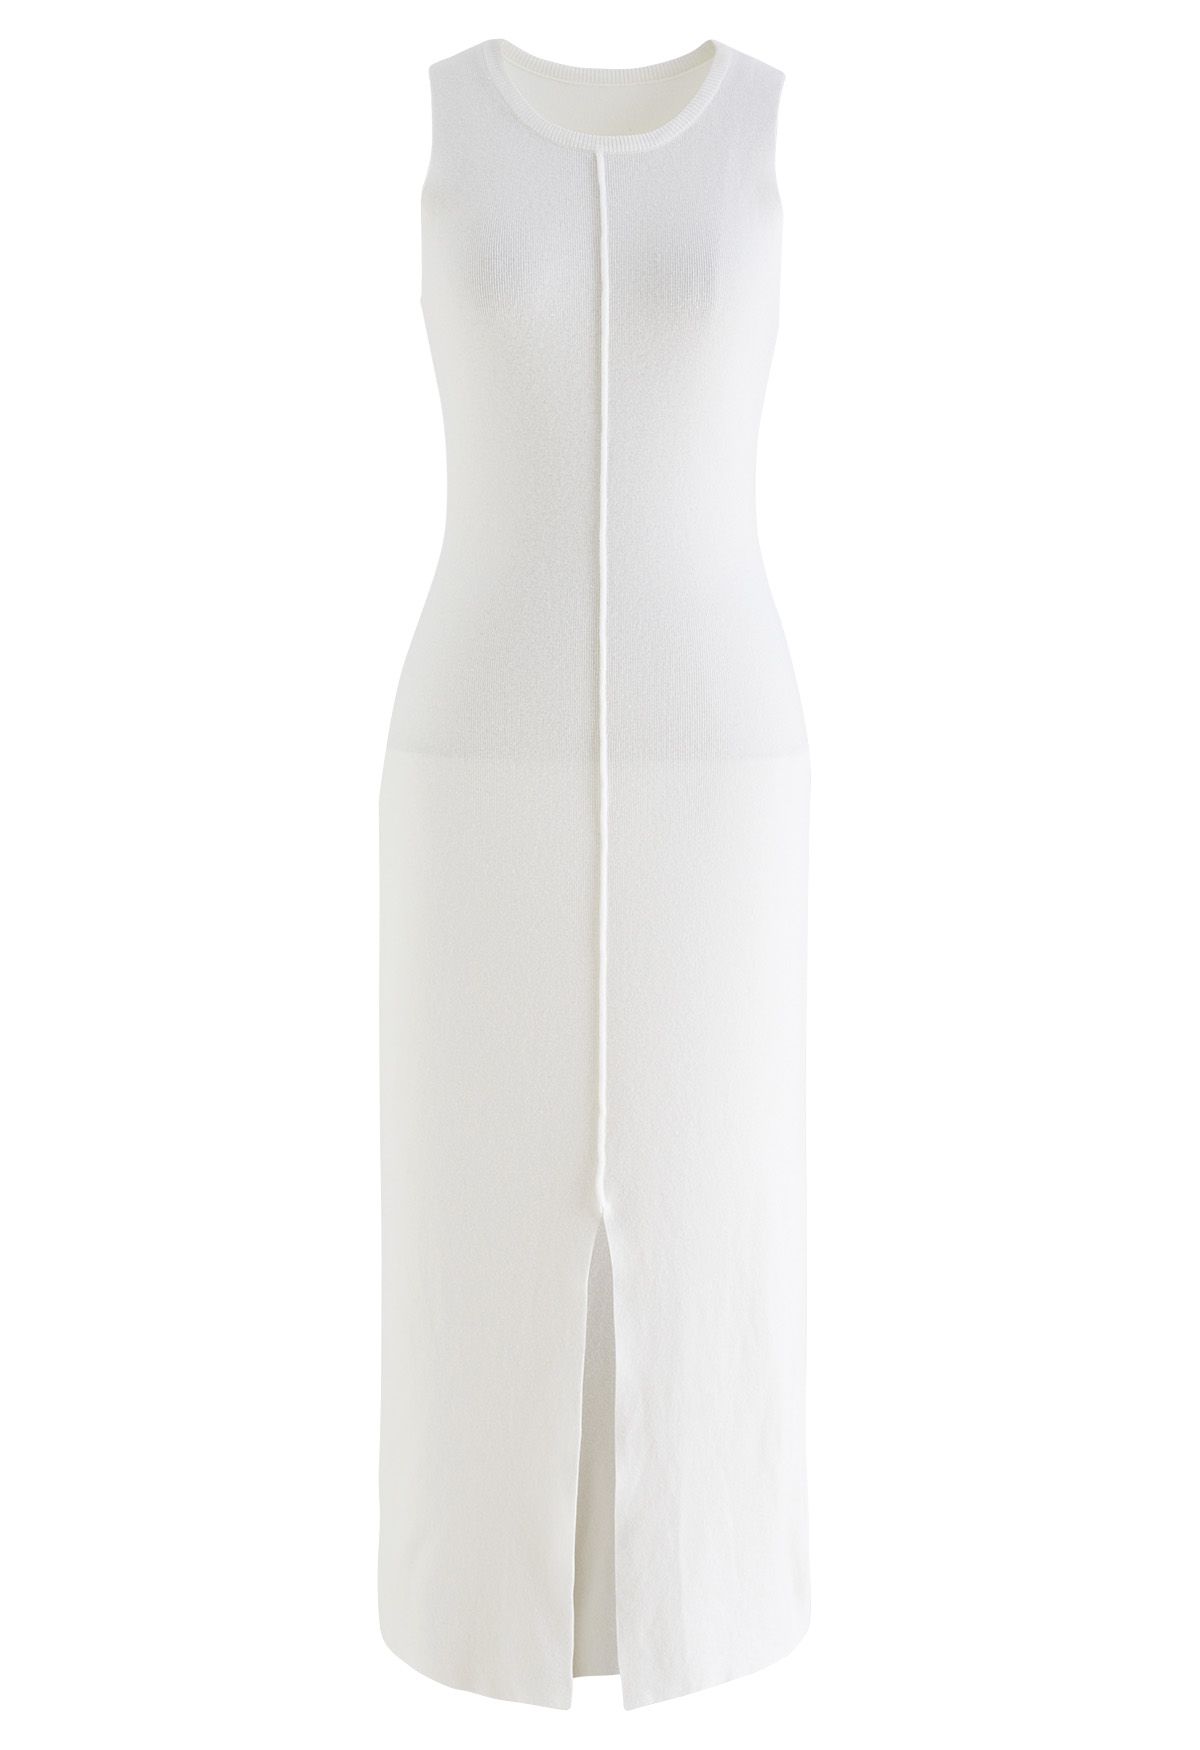 Front Slit Bodycon Knit Dress in White